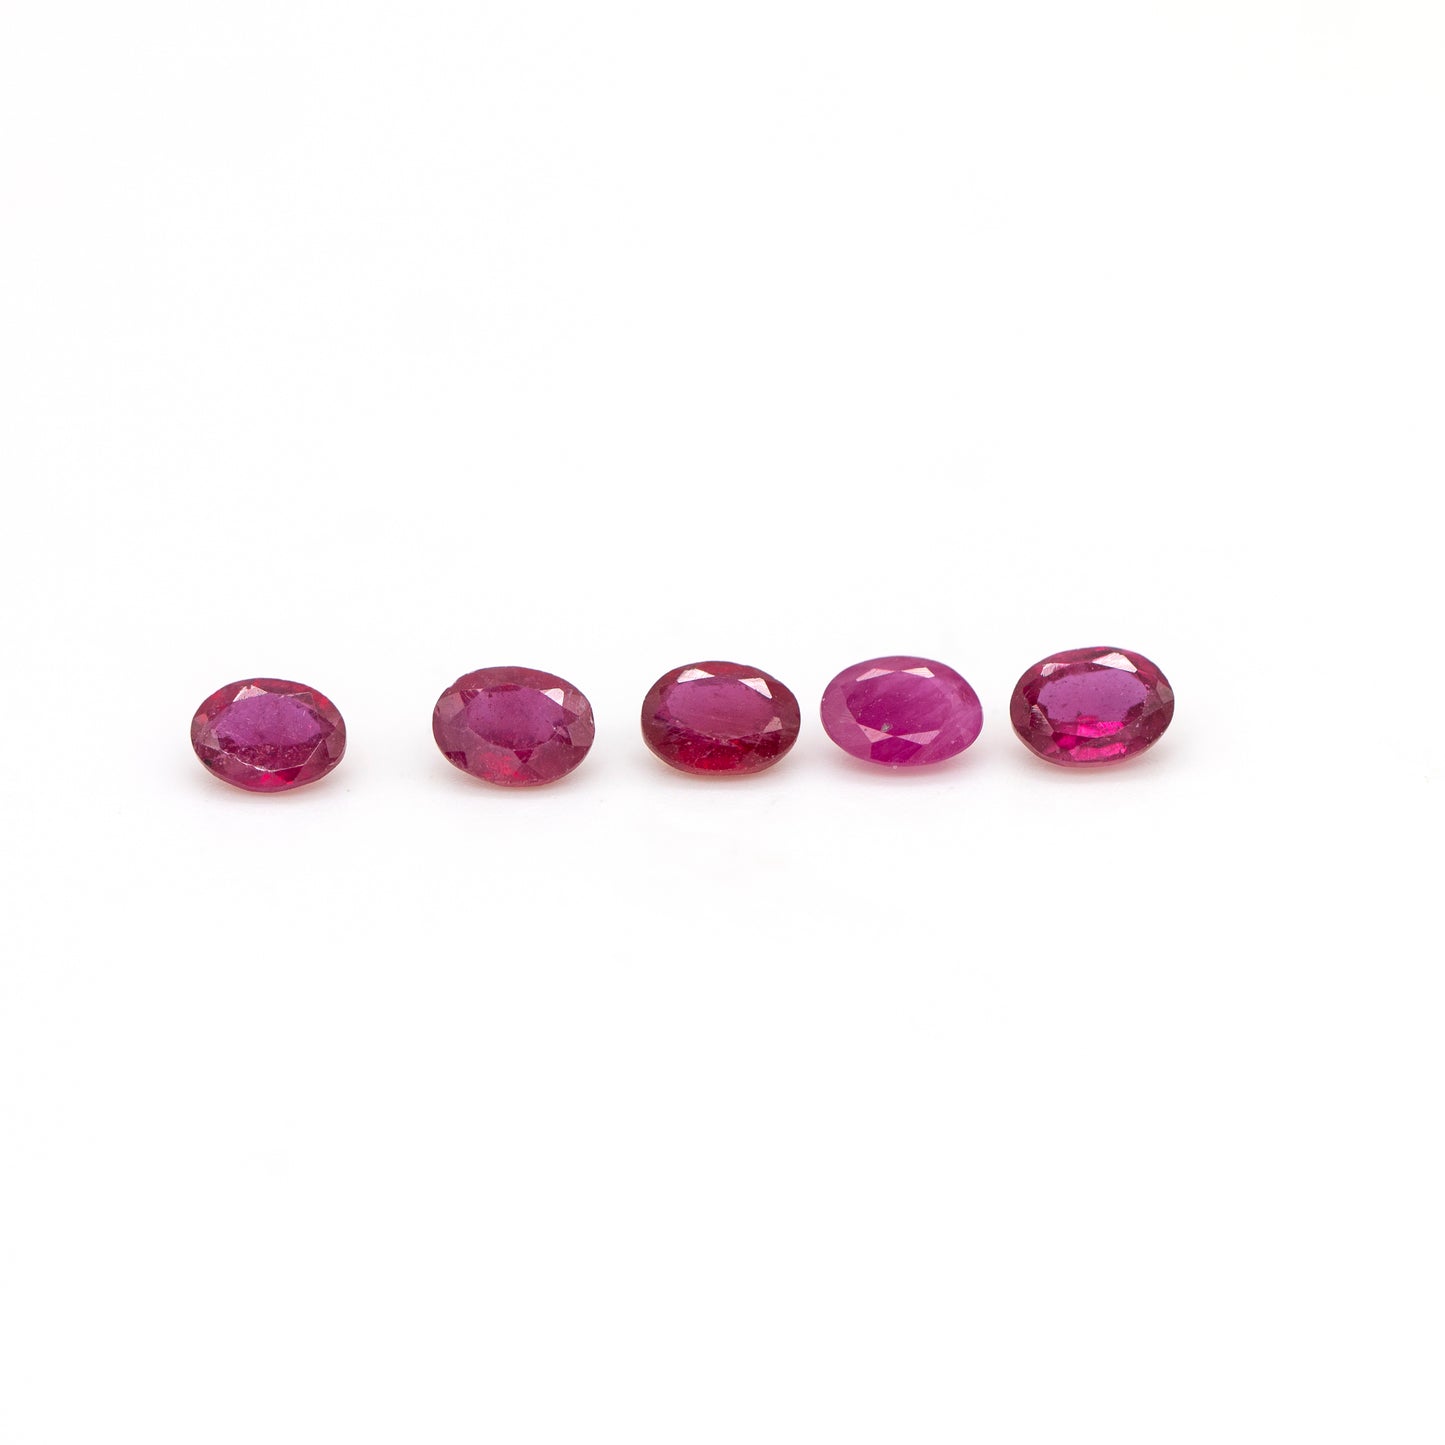 AVG 1.00+ctw NATURAL Ruby Oval 5x4mm 5 Stone Parcel